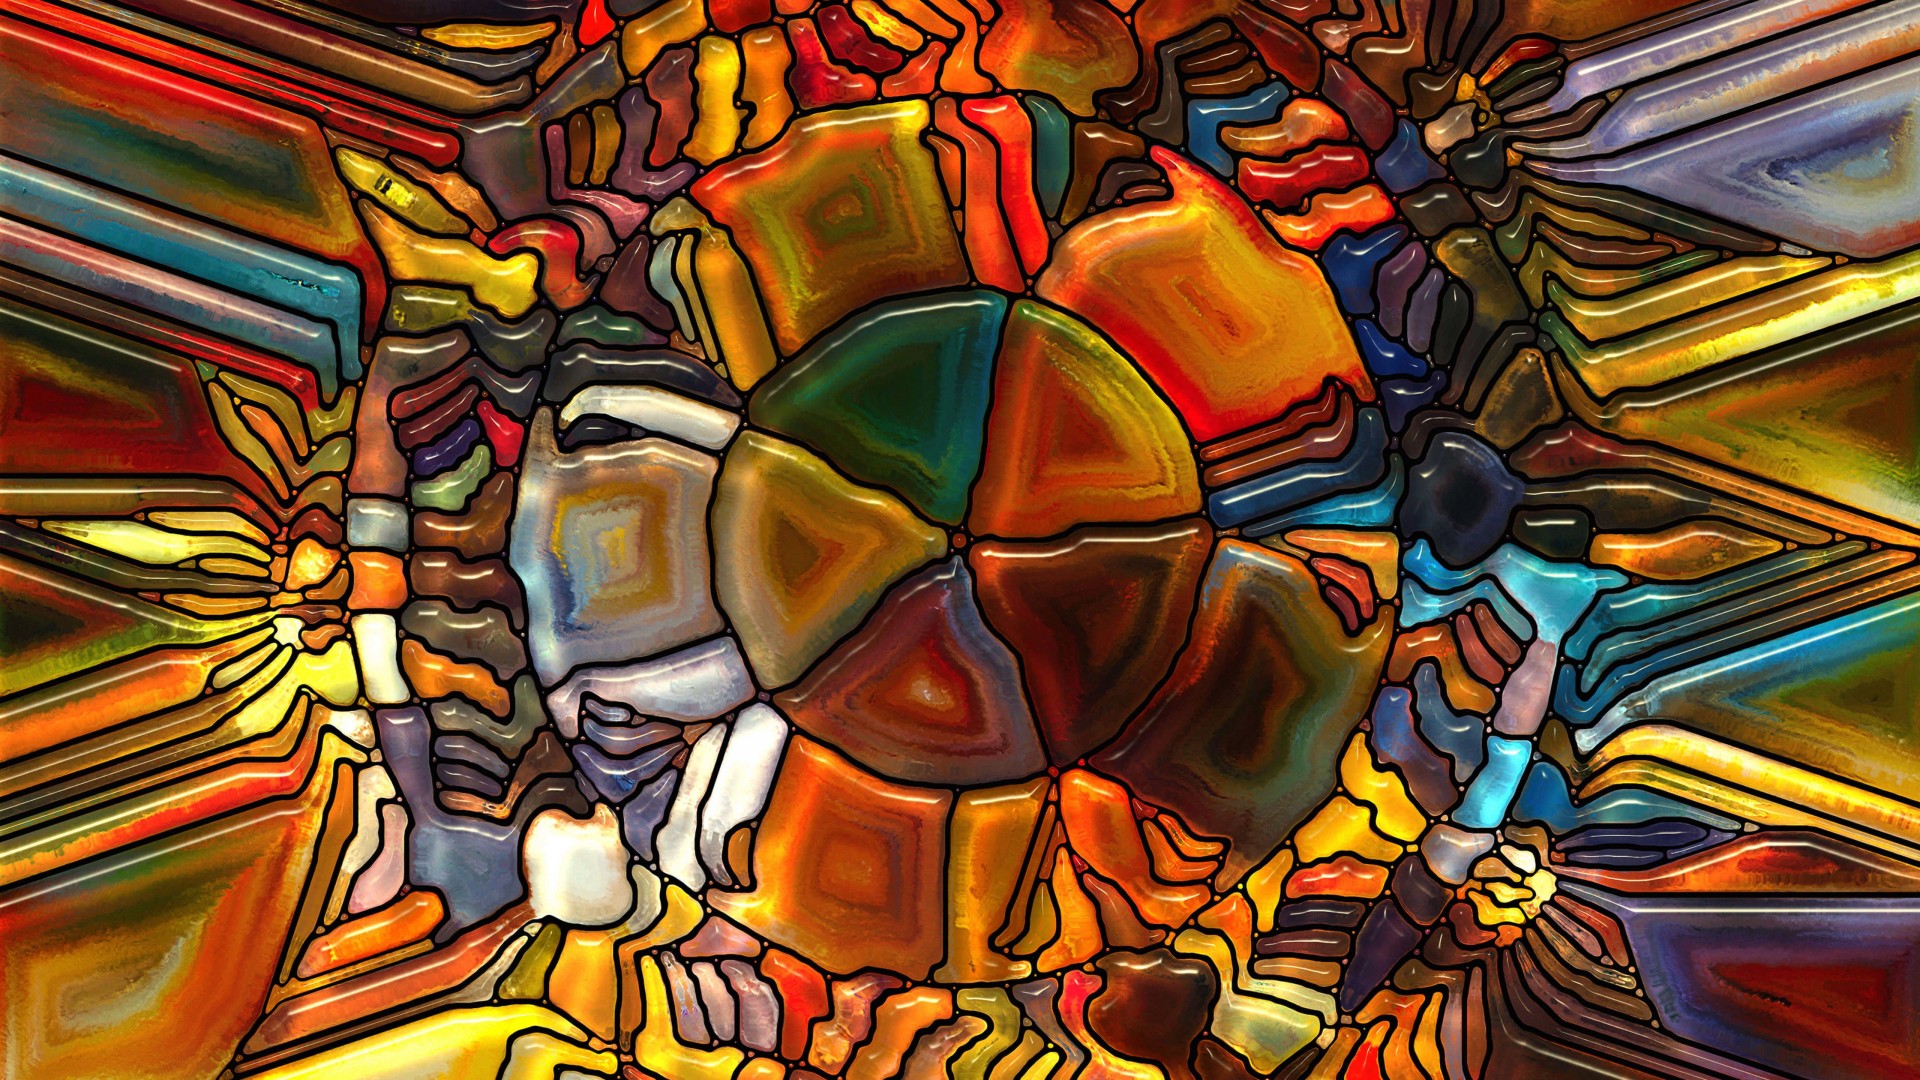 Psychedelic Stained Glass Wallpaper for Desktop 1920x1080